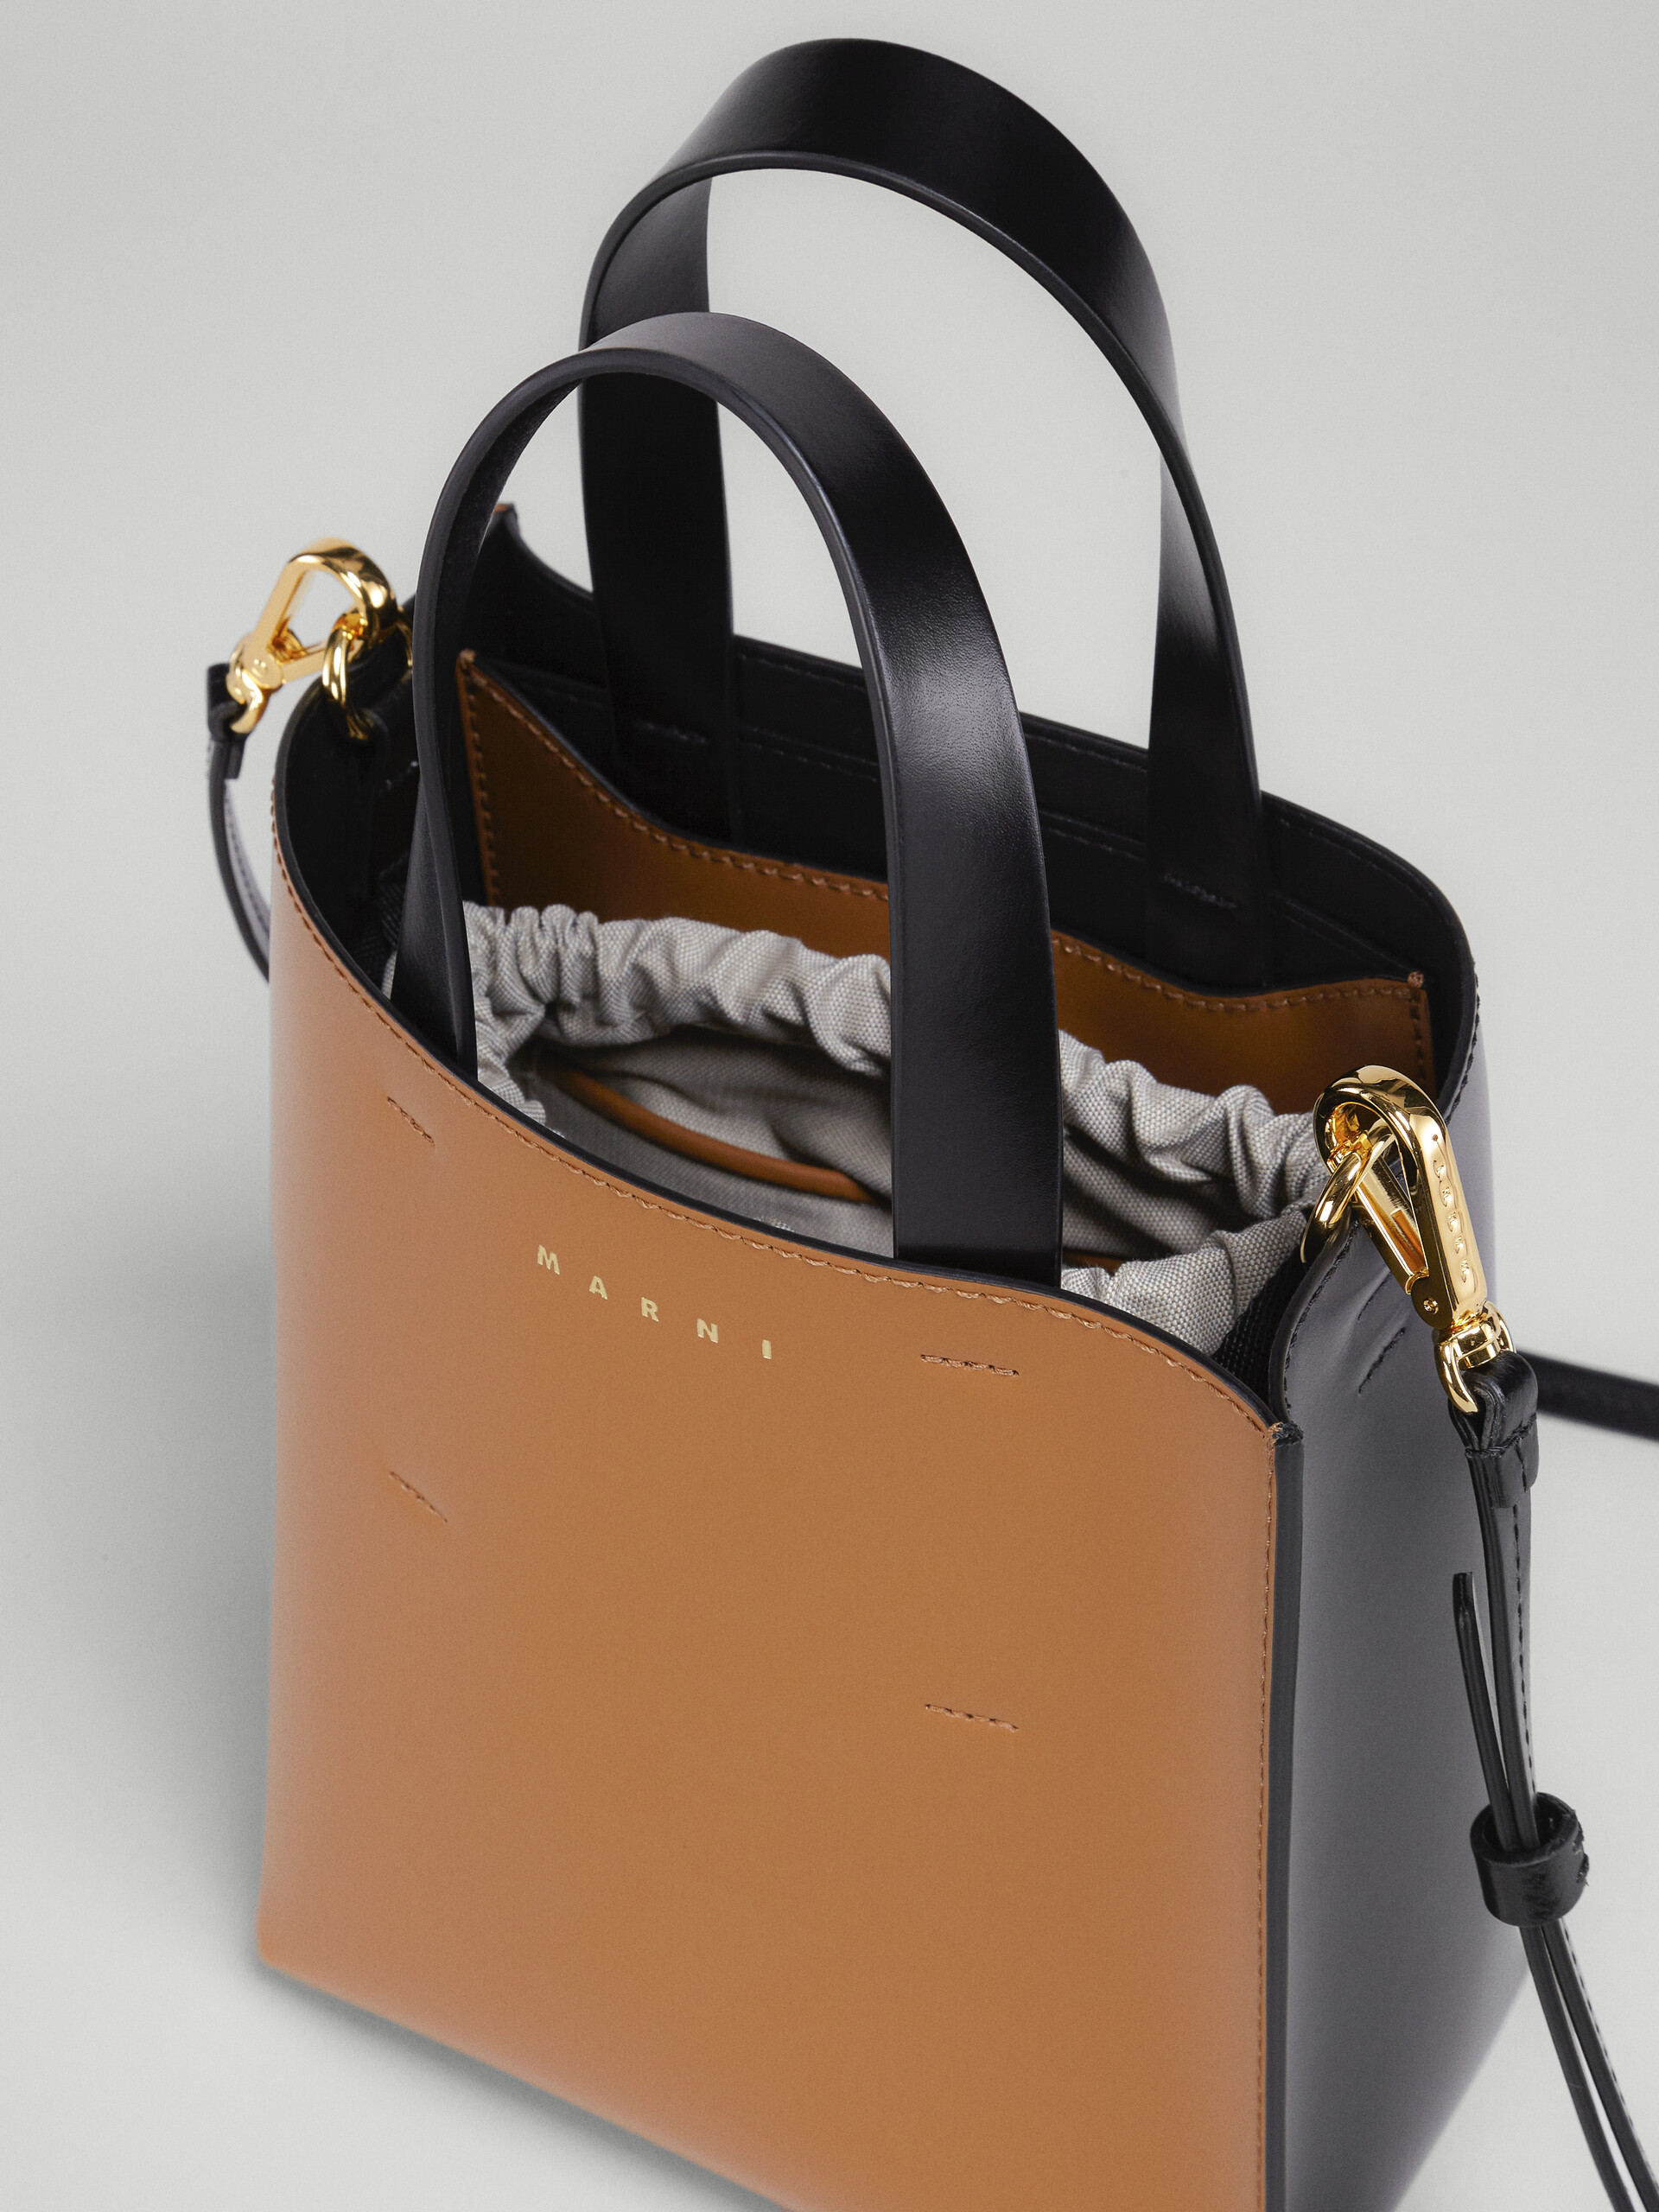 MUSEO mini bag in brown and black leather - Shopping Bags - Image 5